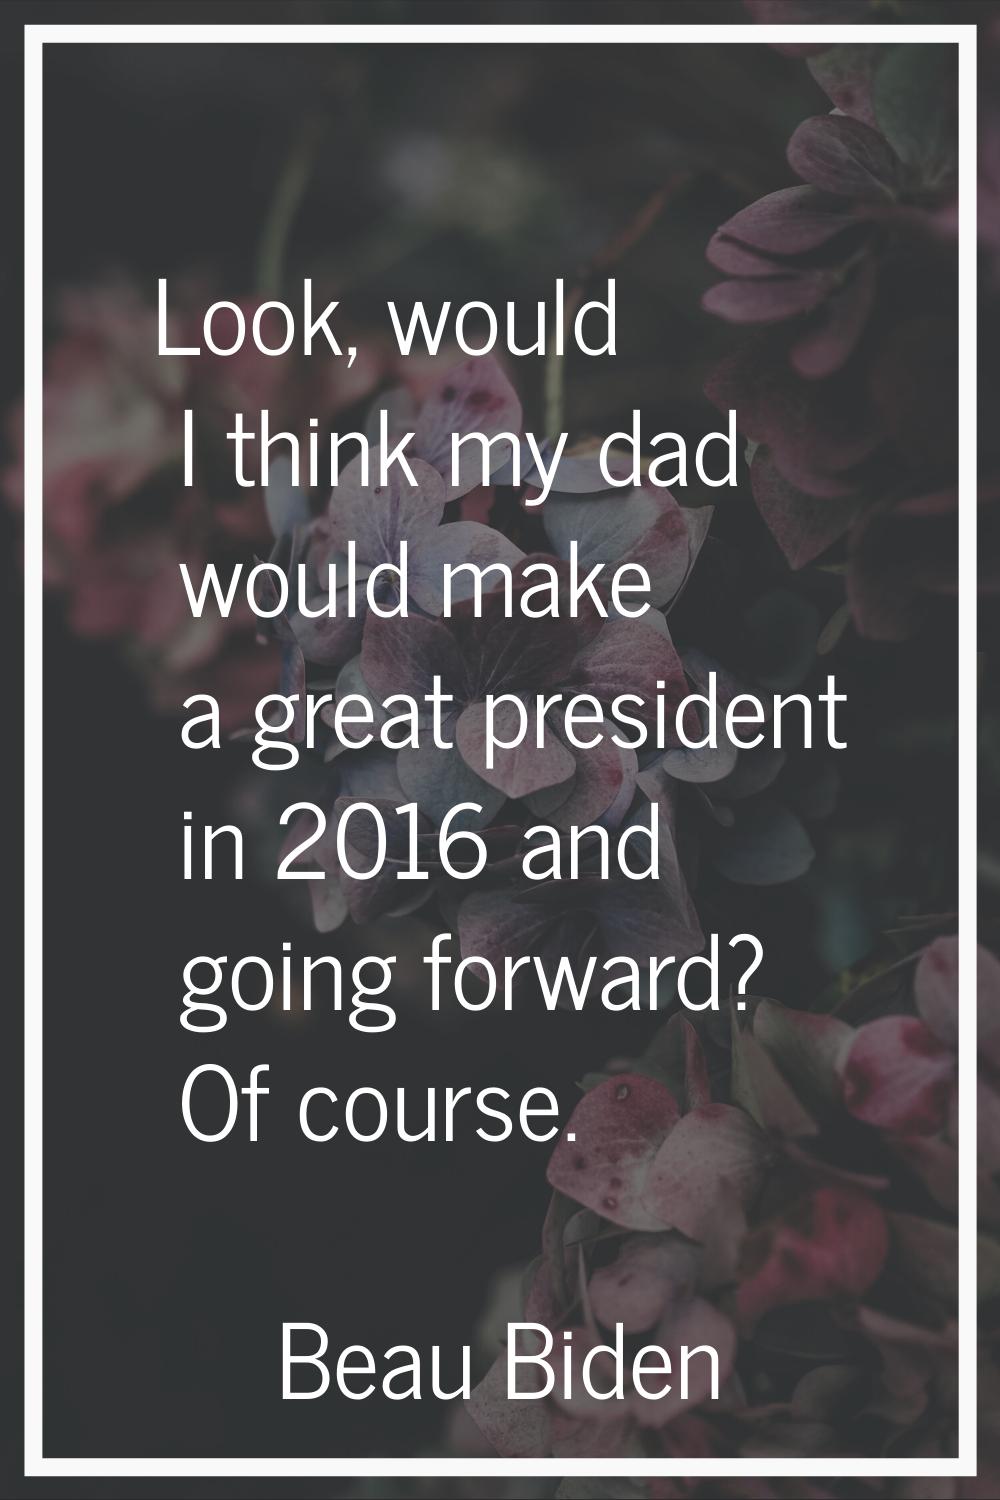 Look, would I think my dad would make a great president in 2016 and going forward? Of course.